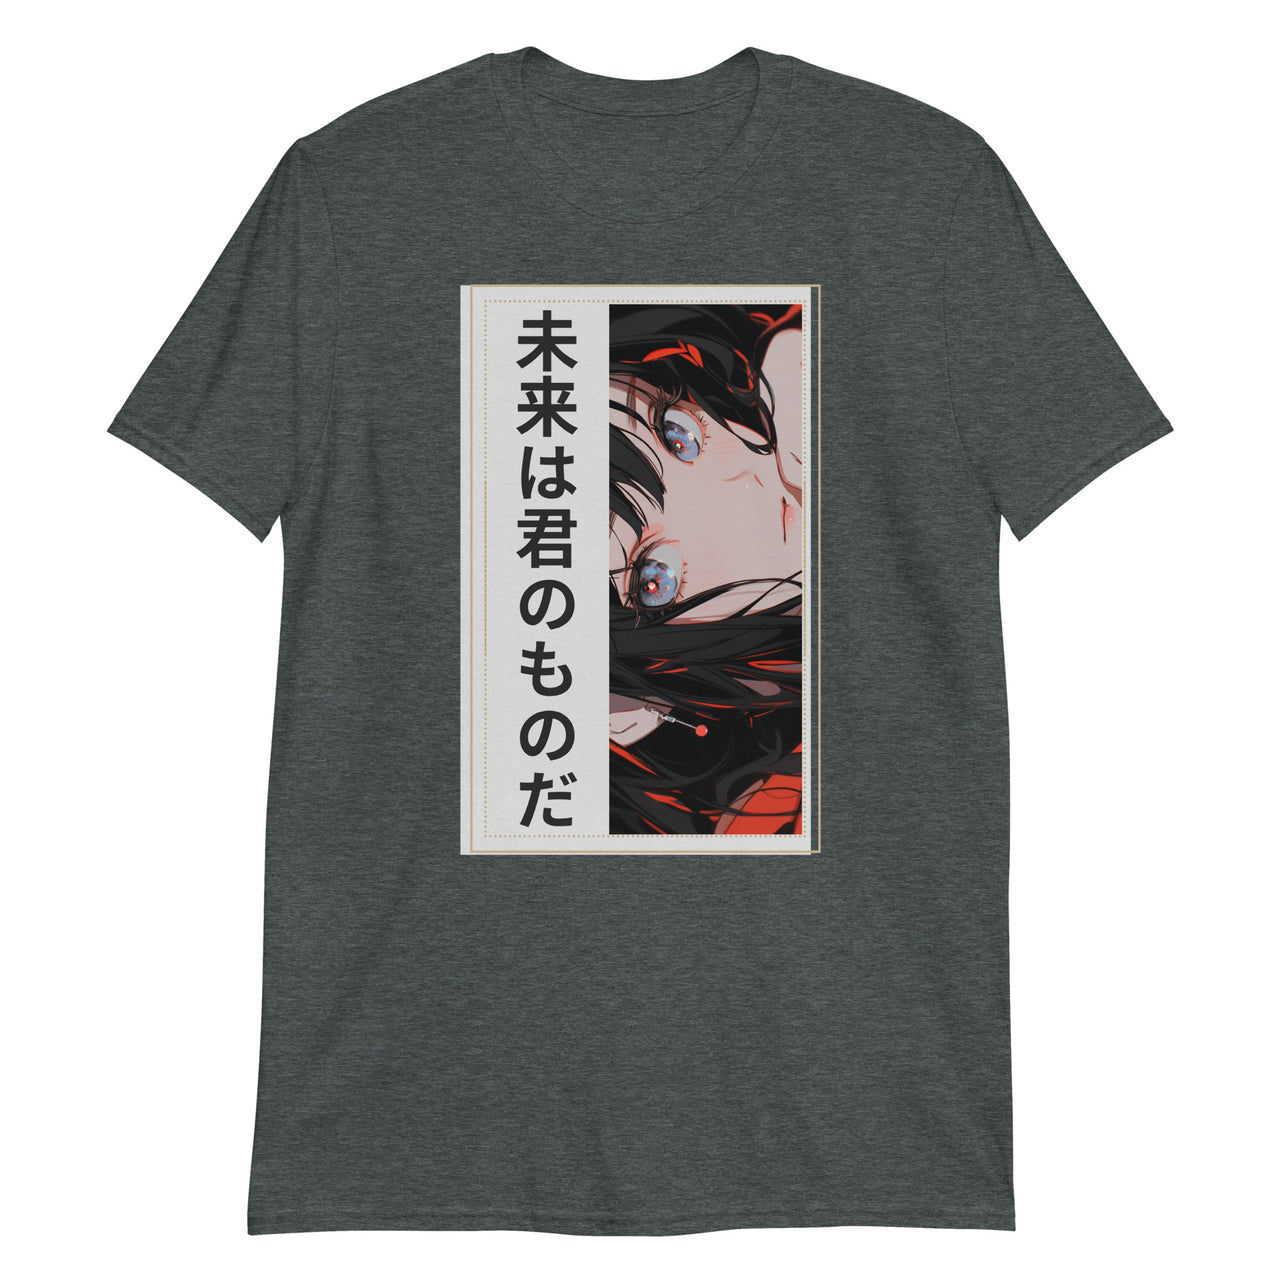 The Future is Yours Anime Girl Japanese T-Shirt